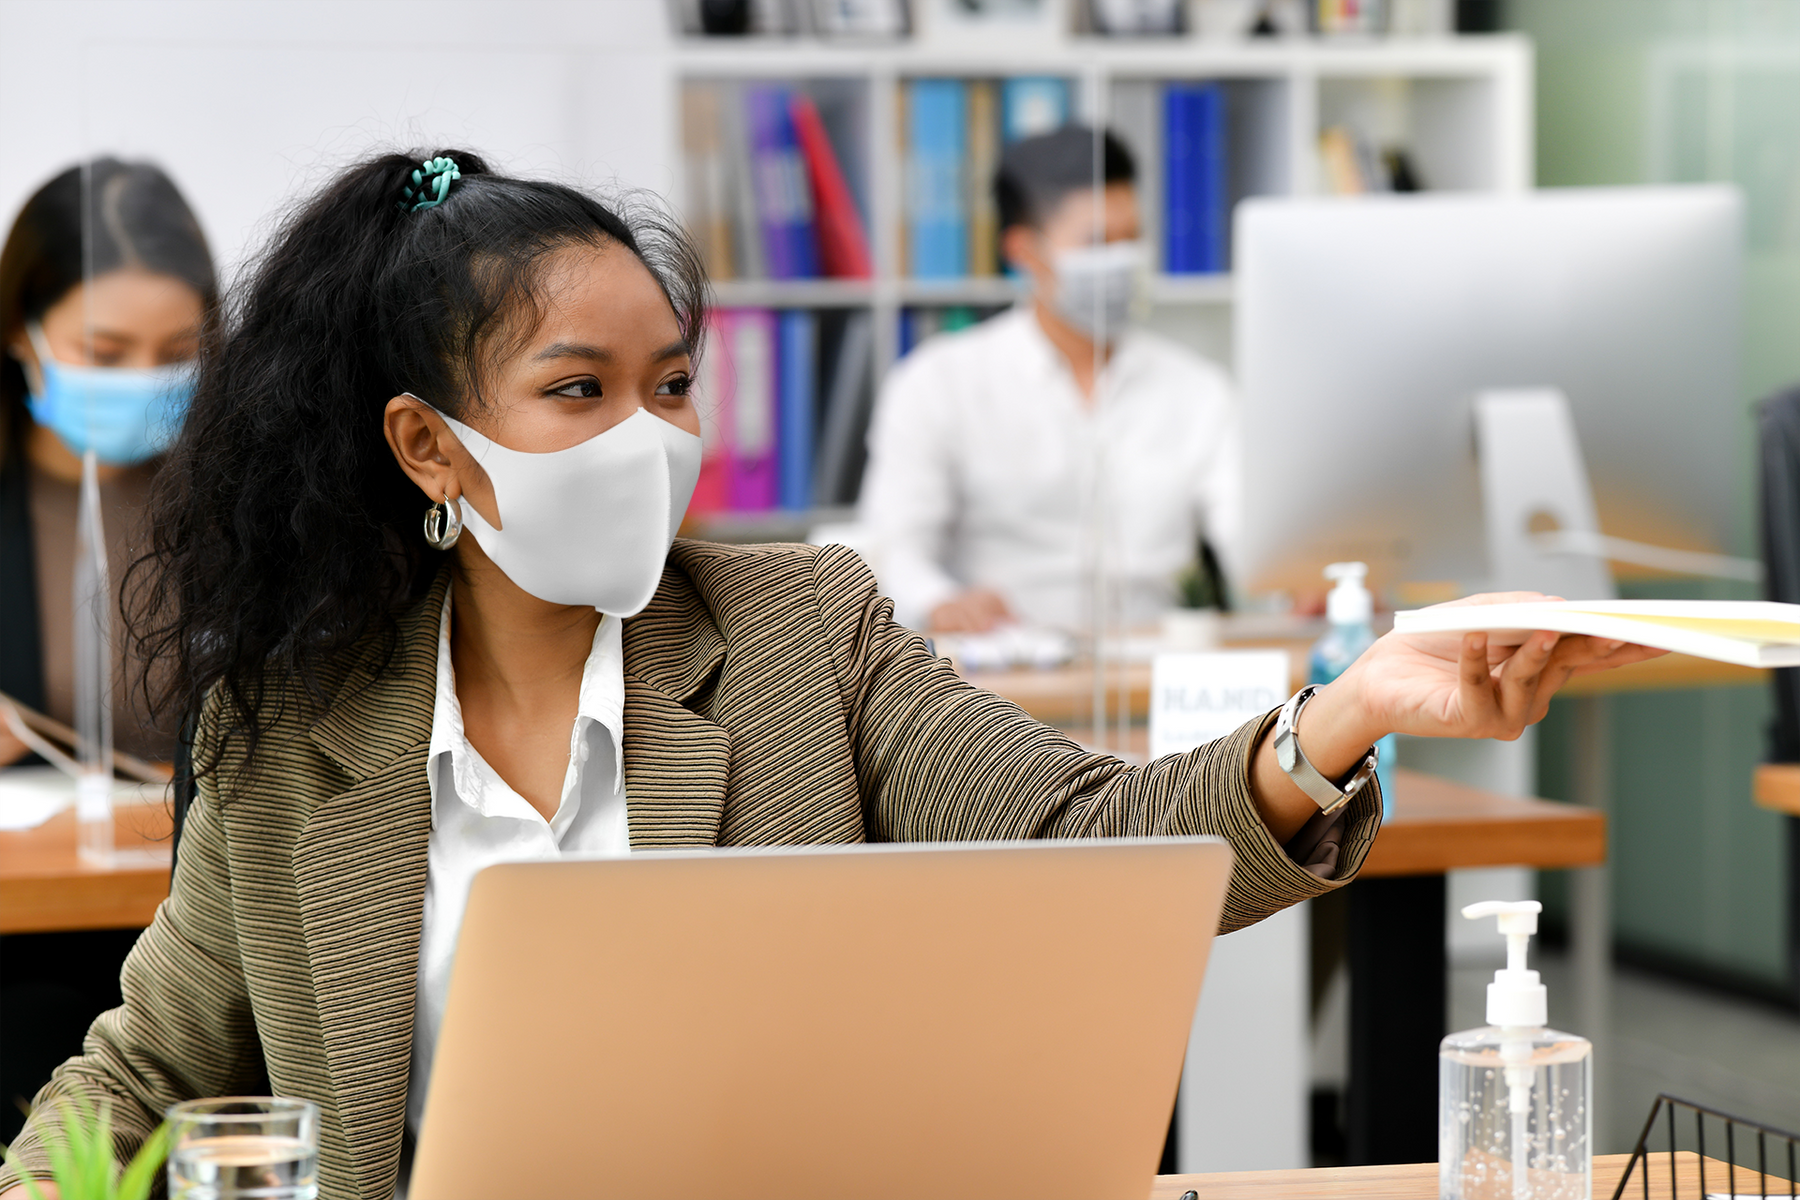 BundyPlus | Do I need to wear a mask in the office?